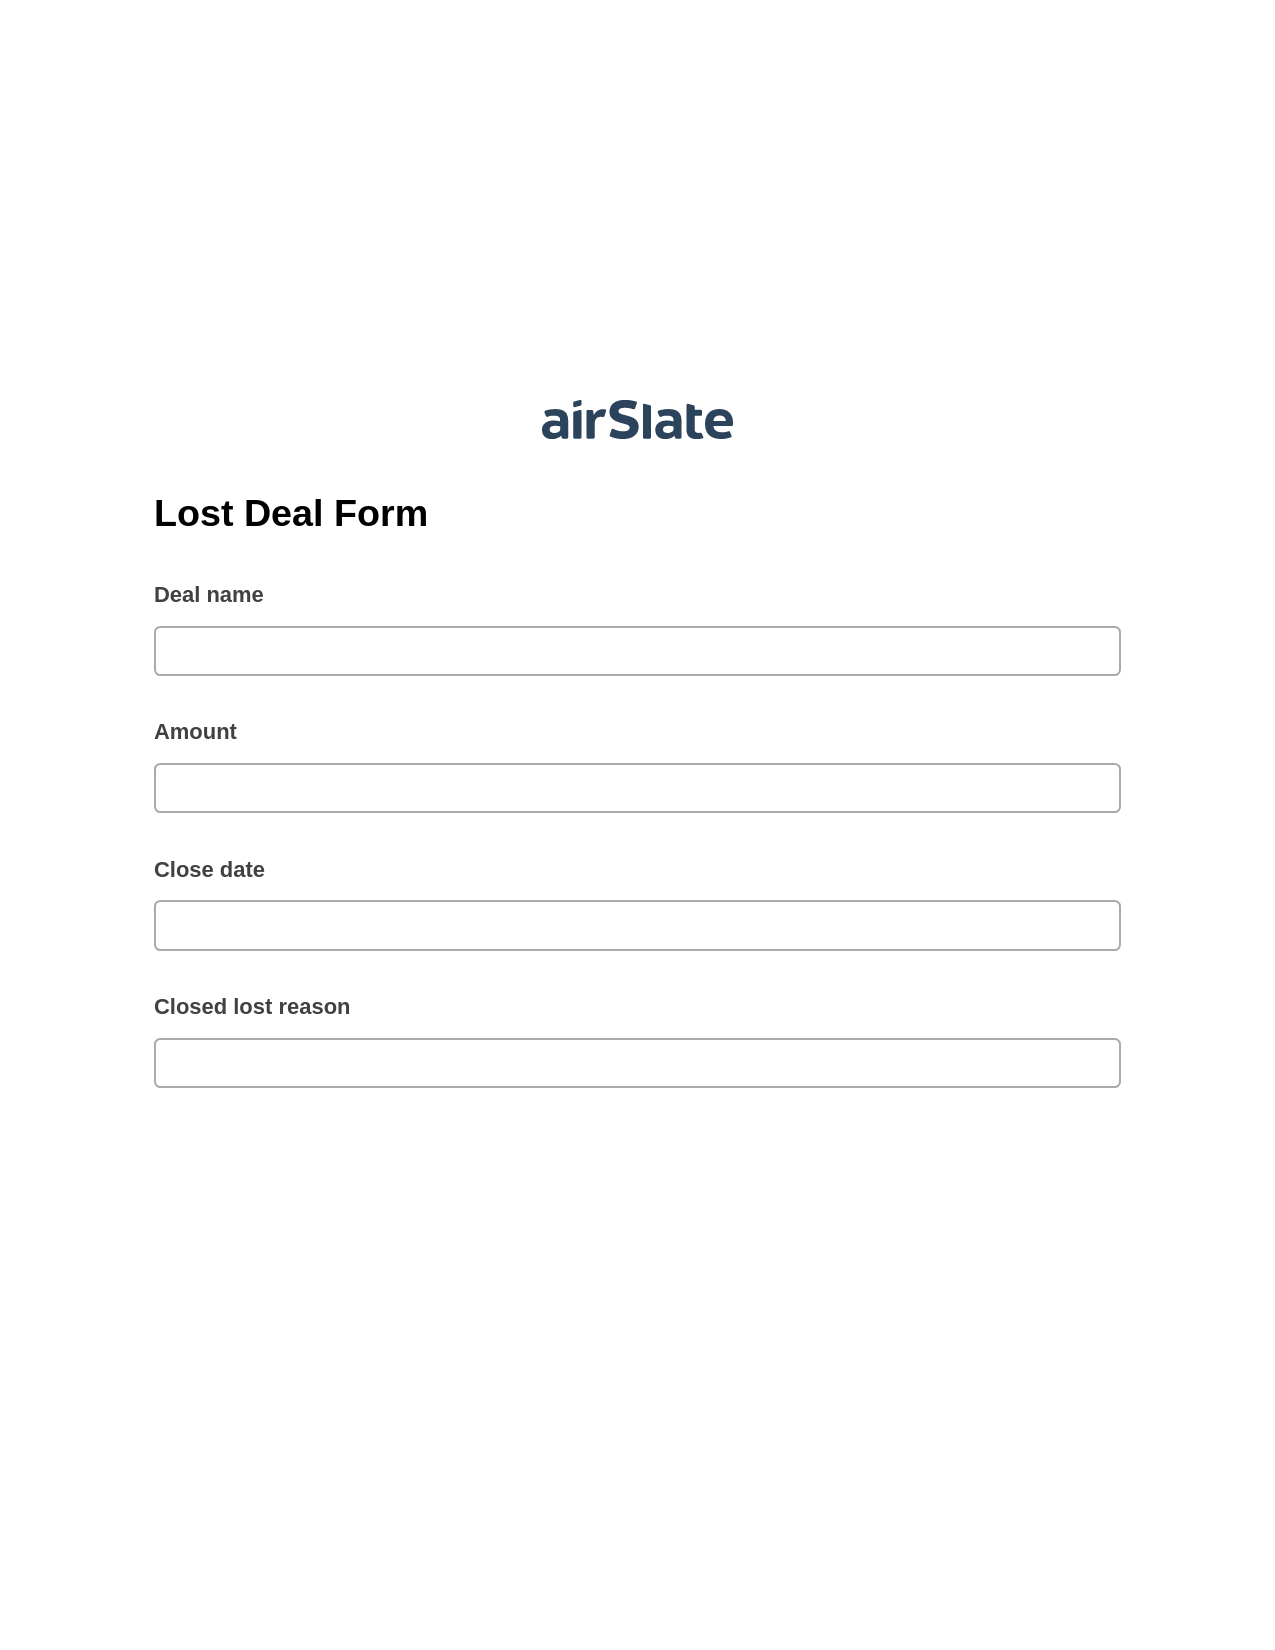 Lost Deal Form Pre-fill from Salesforce Records Bot, Update Salesforce Records Bot, Export to Smartsheet